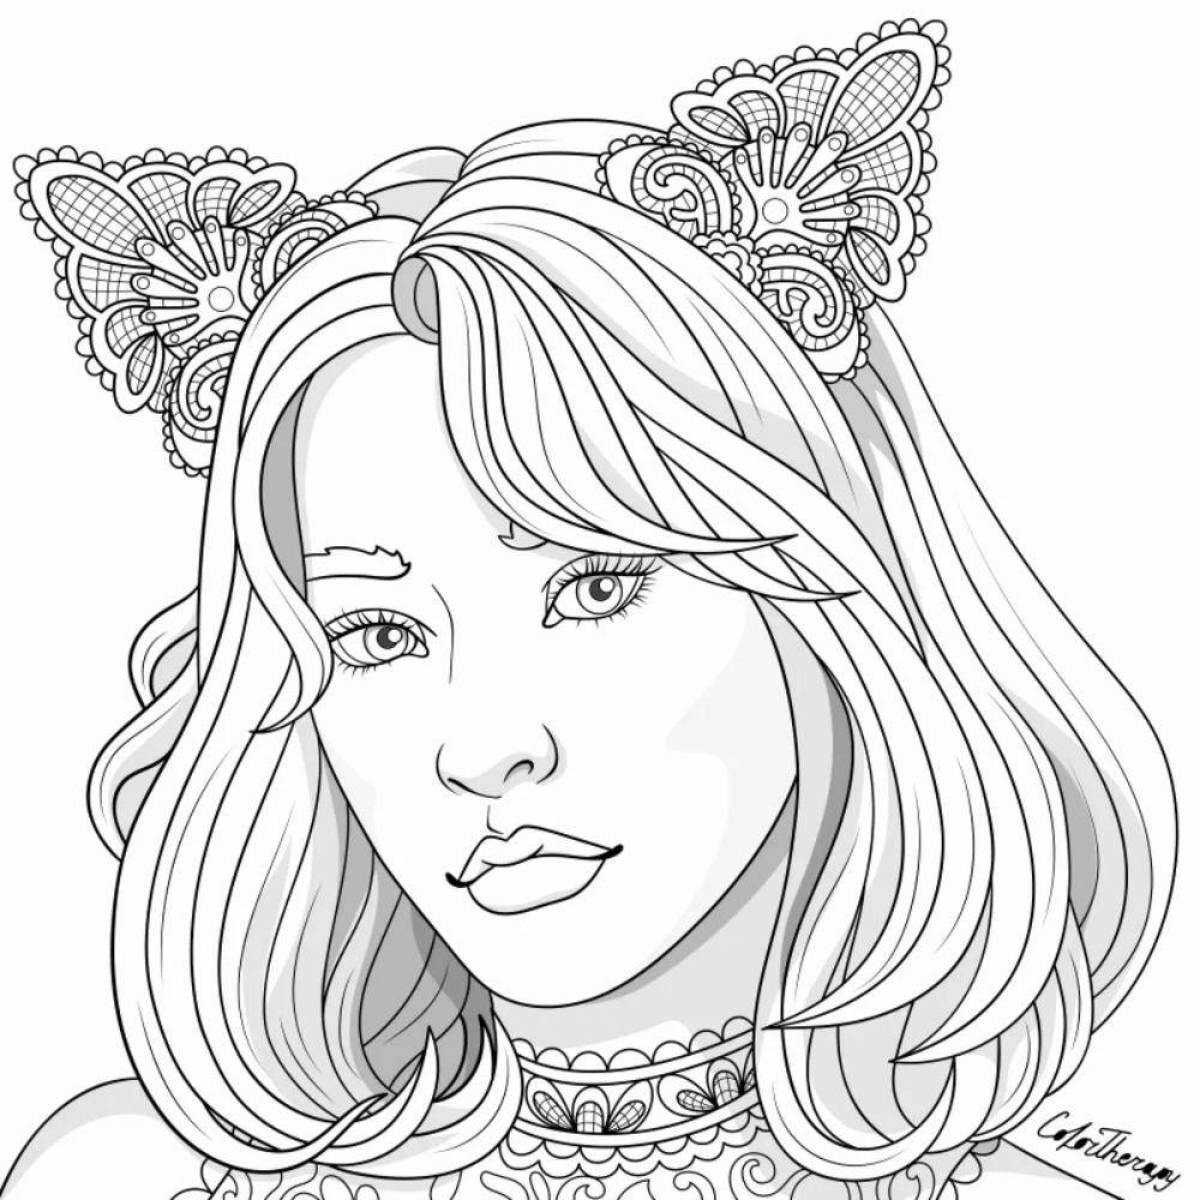 Shining coloring book for girls 16 years old